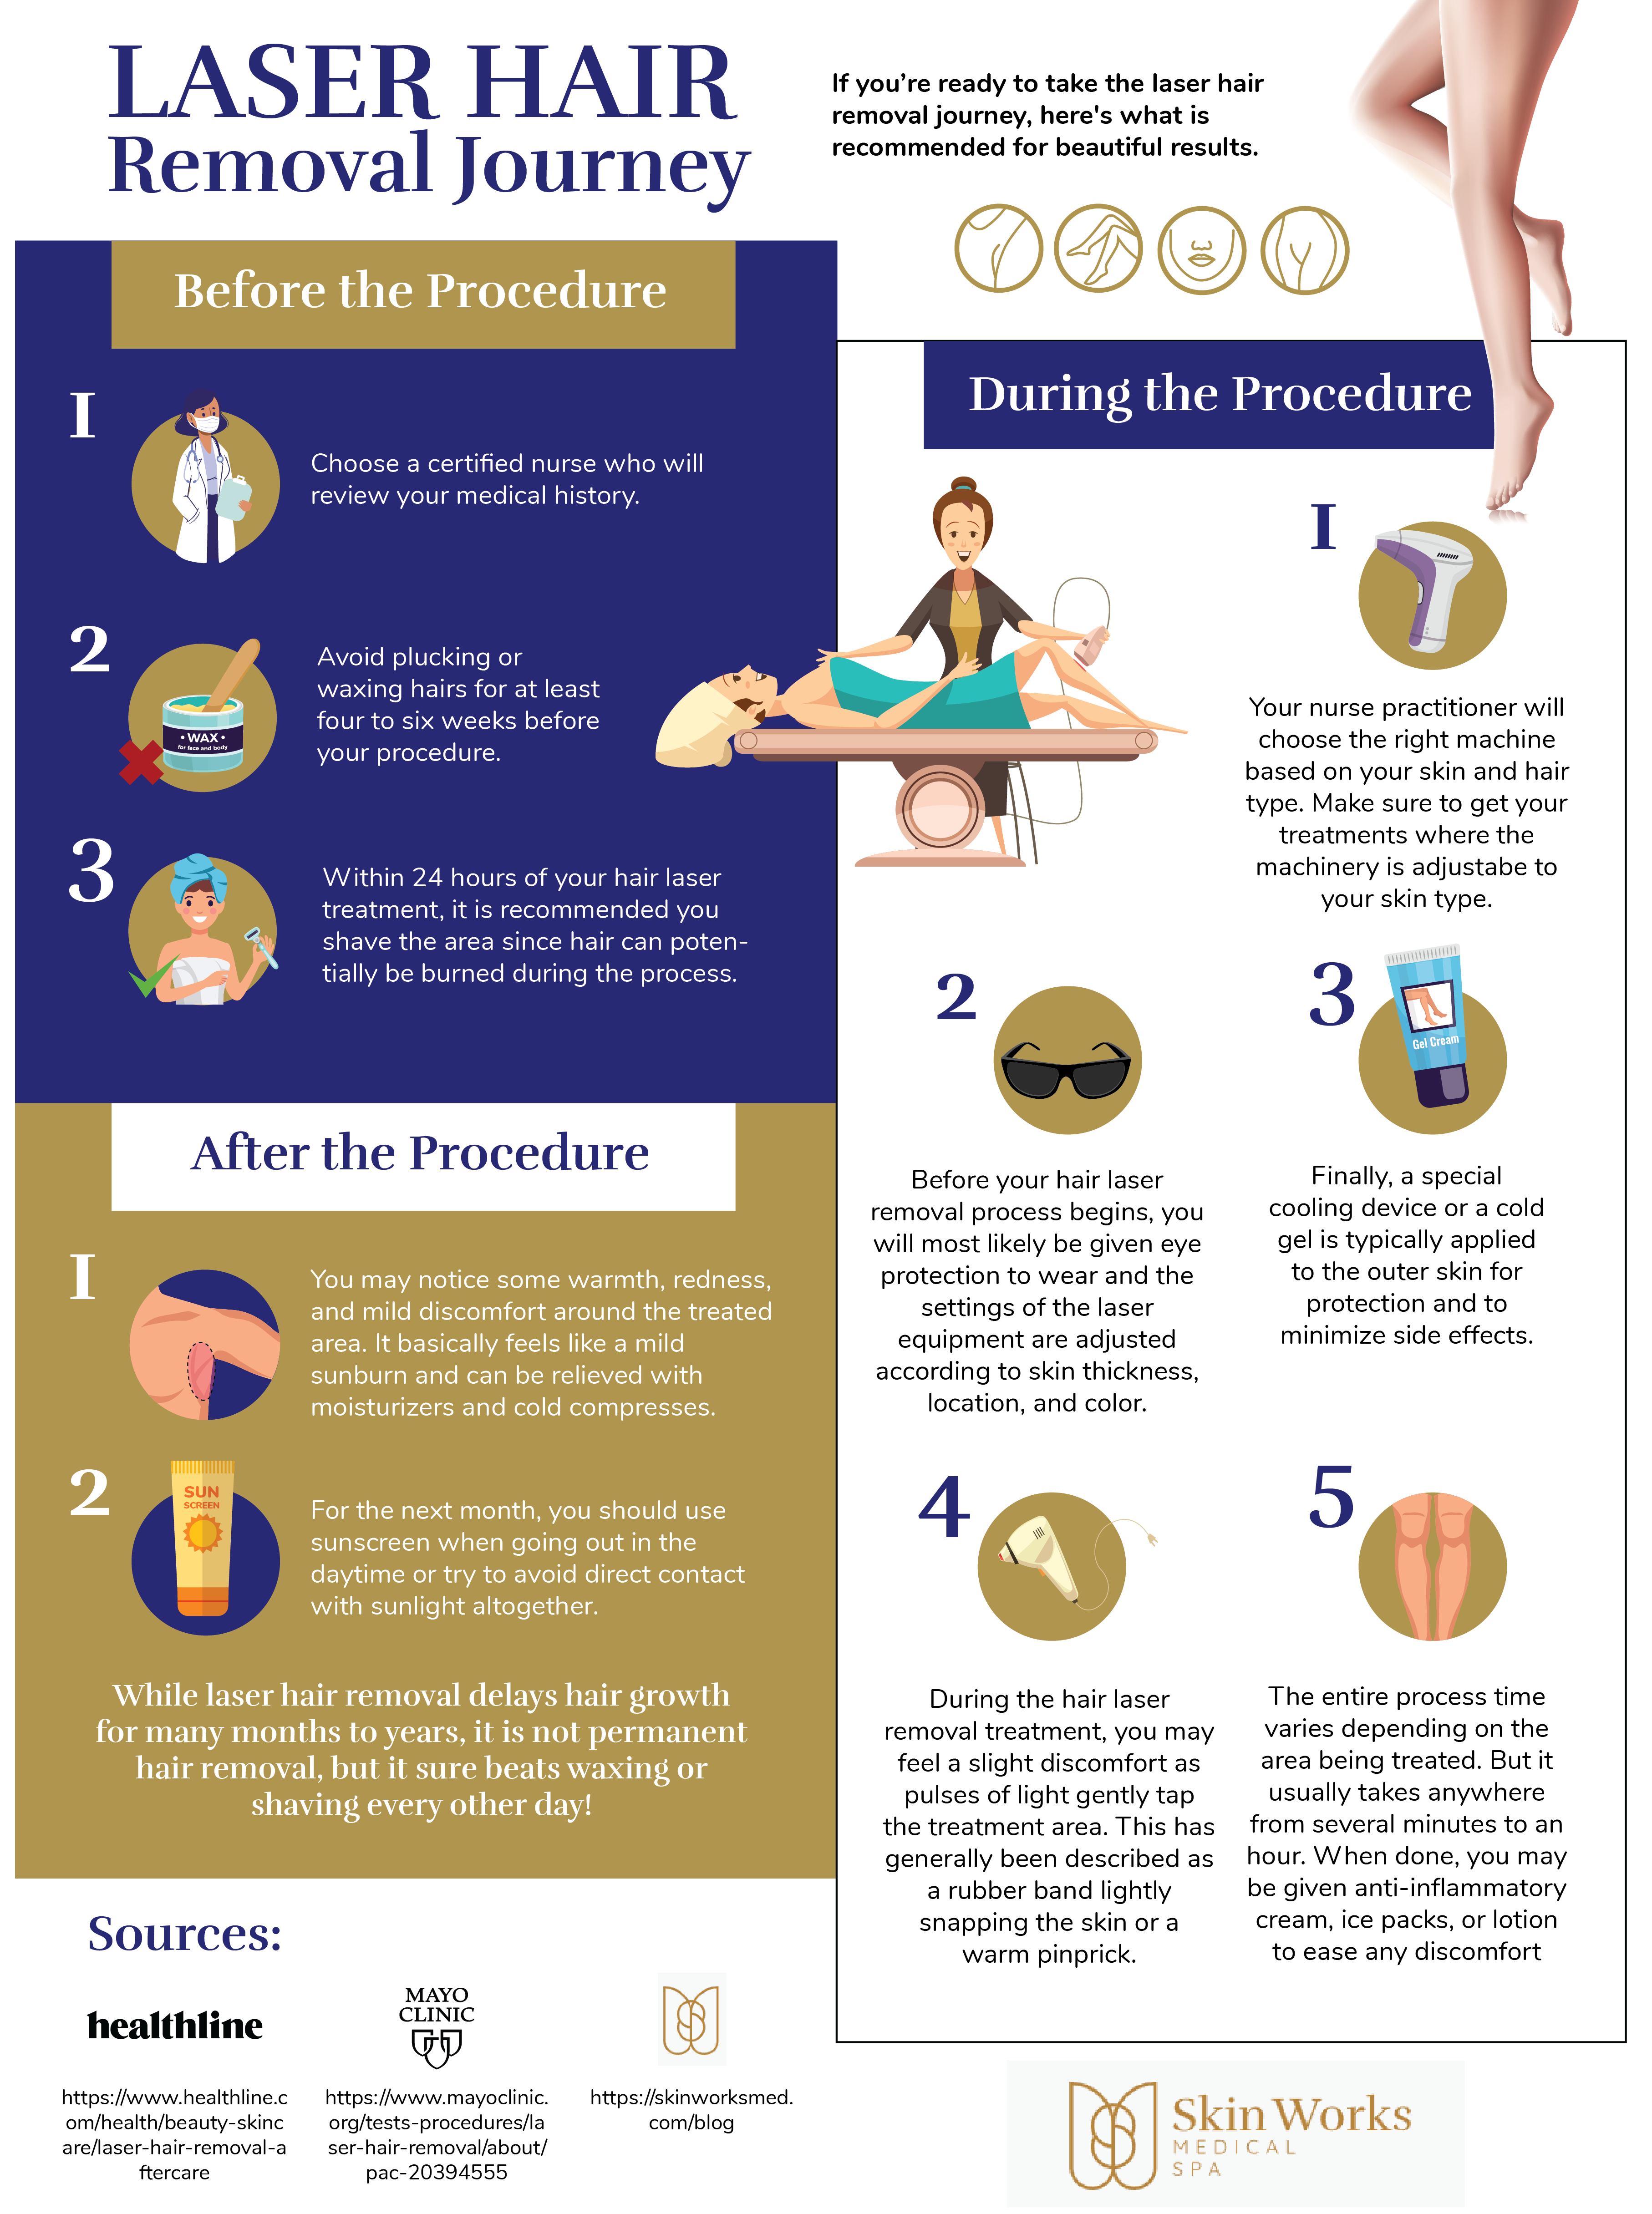 How Long Does Laser Hair Removal Take? ; An Infographic